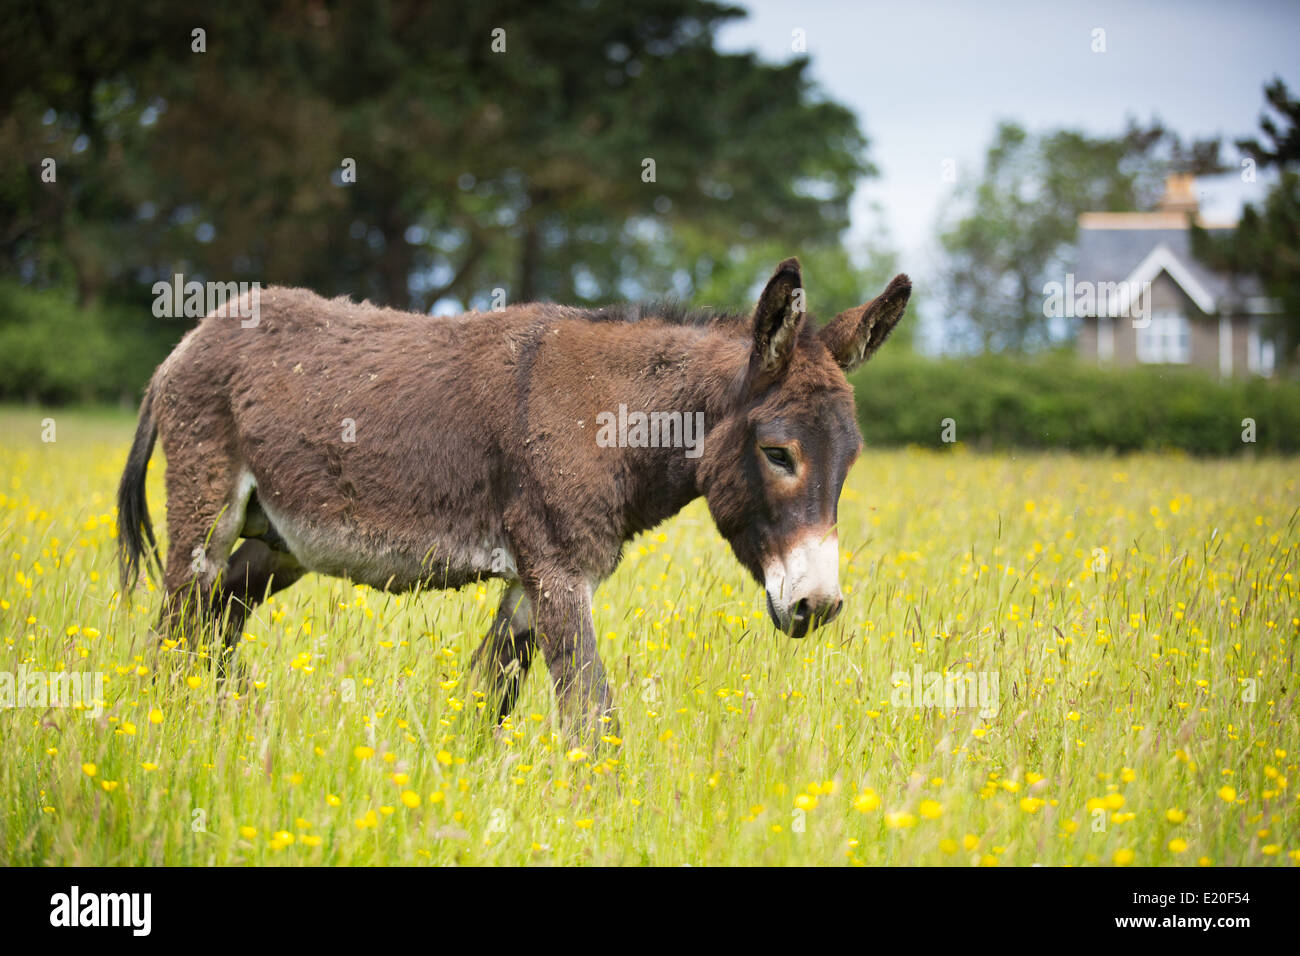 A lone brown donkey in a field of buttercups Stock Photo